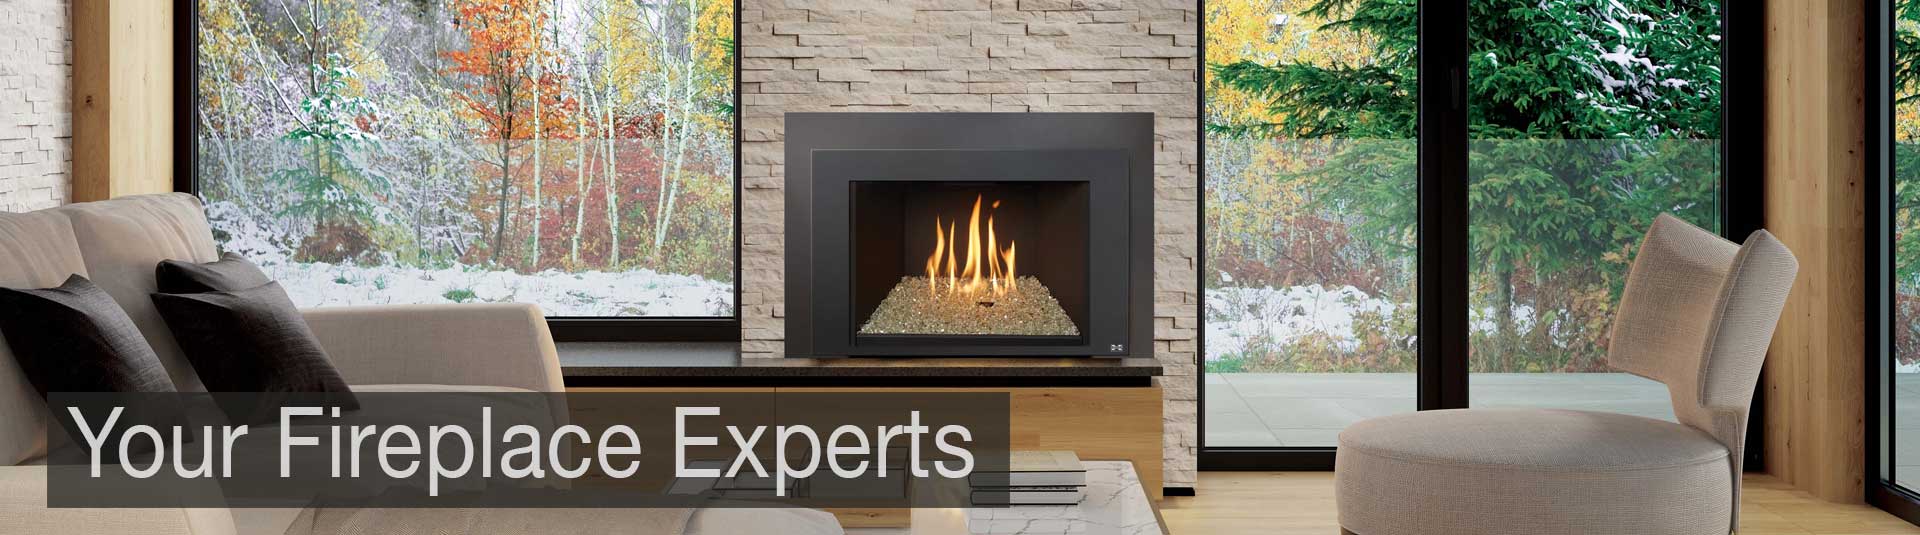 The Fireplace Experts at Benson Stone Company